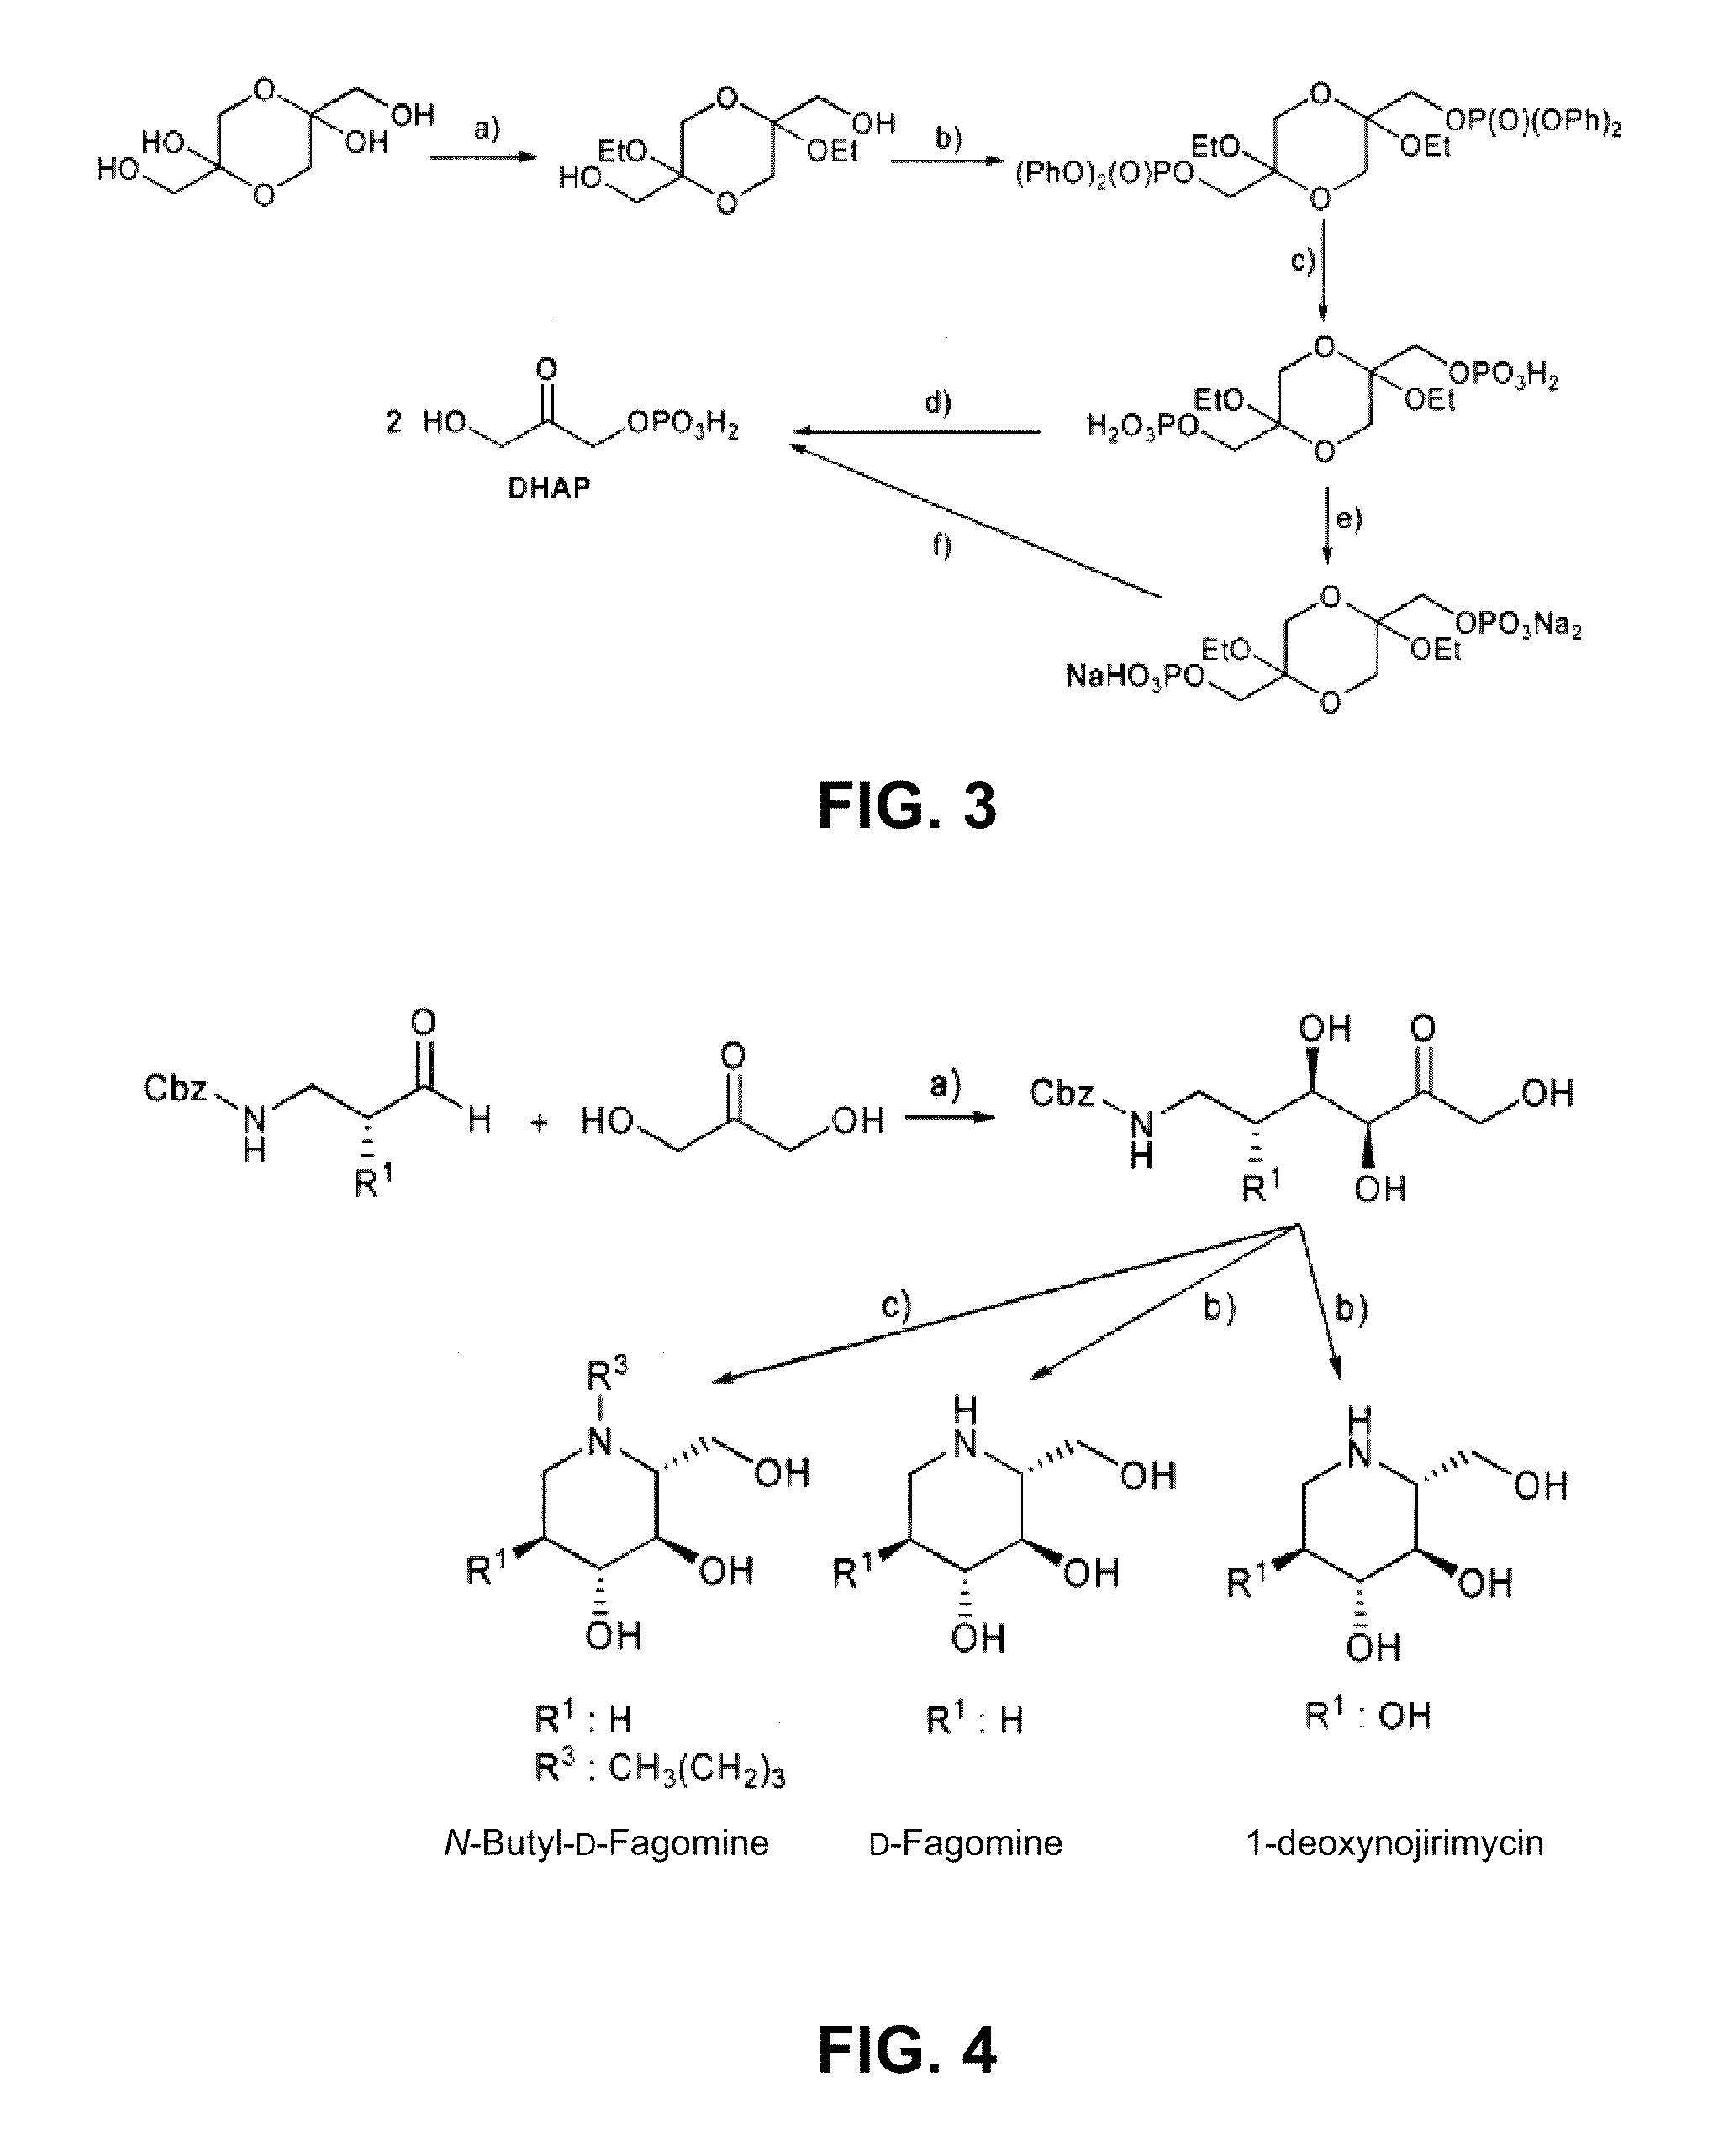 Chemoenzymatic process for the preparation of iminocyclitols